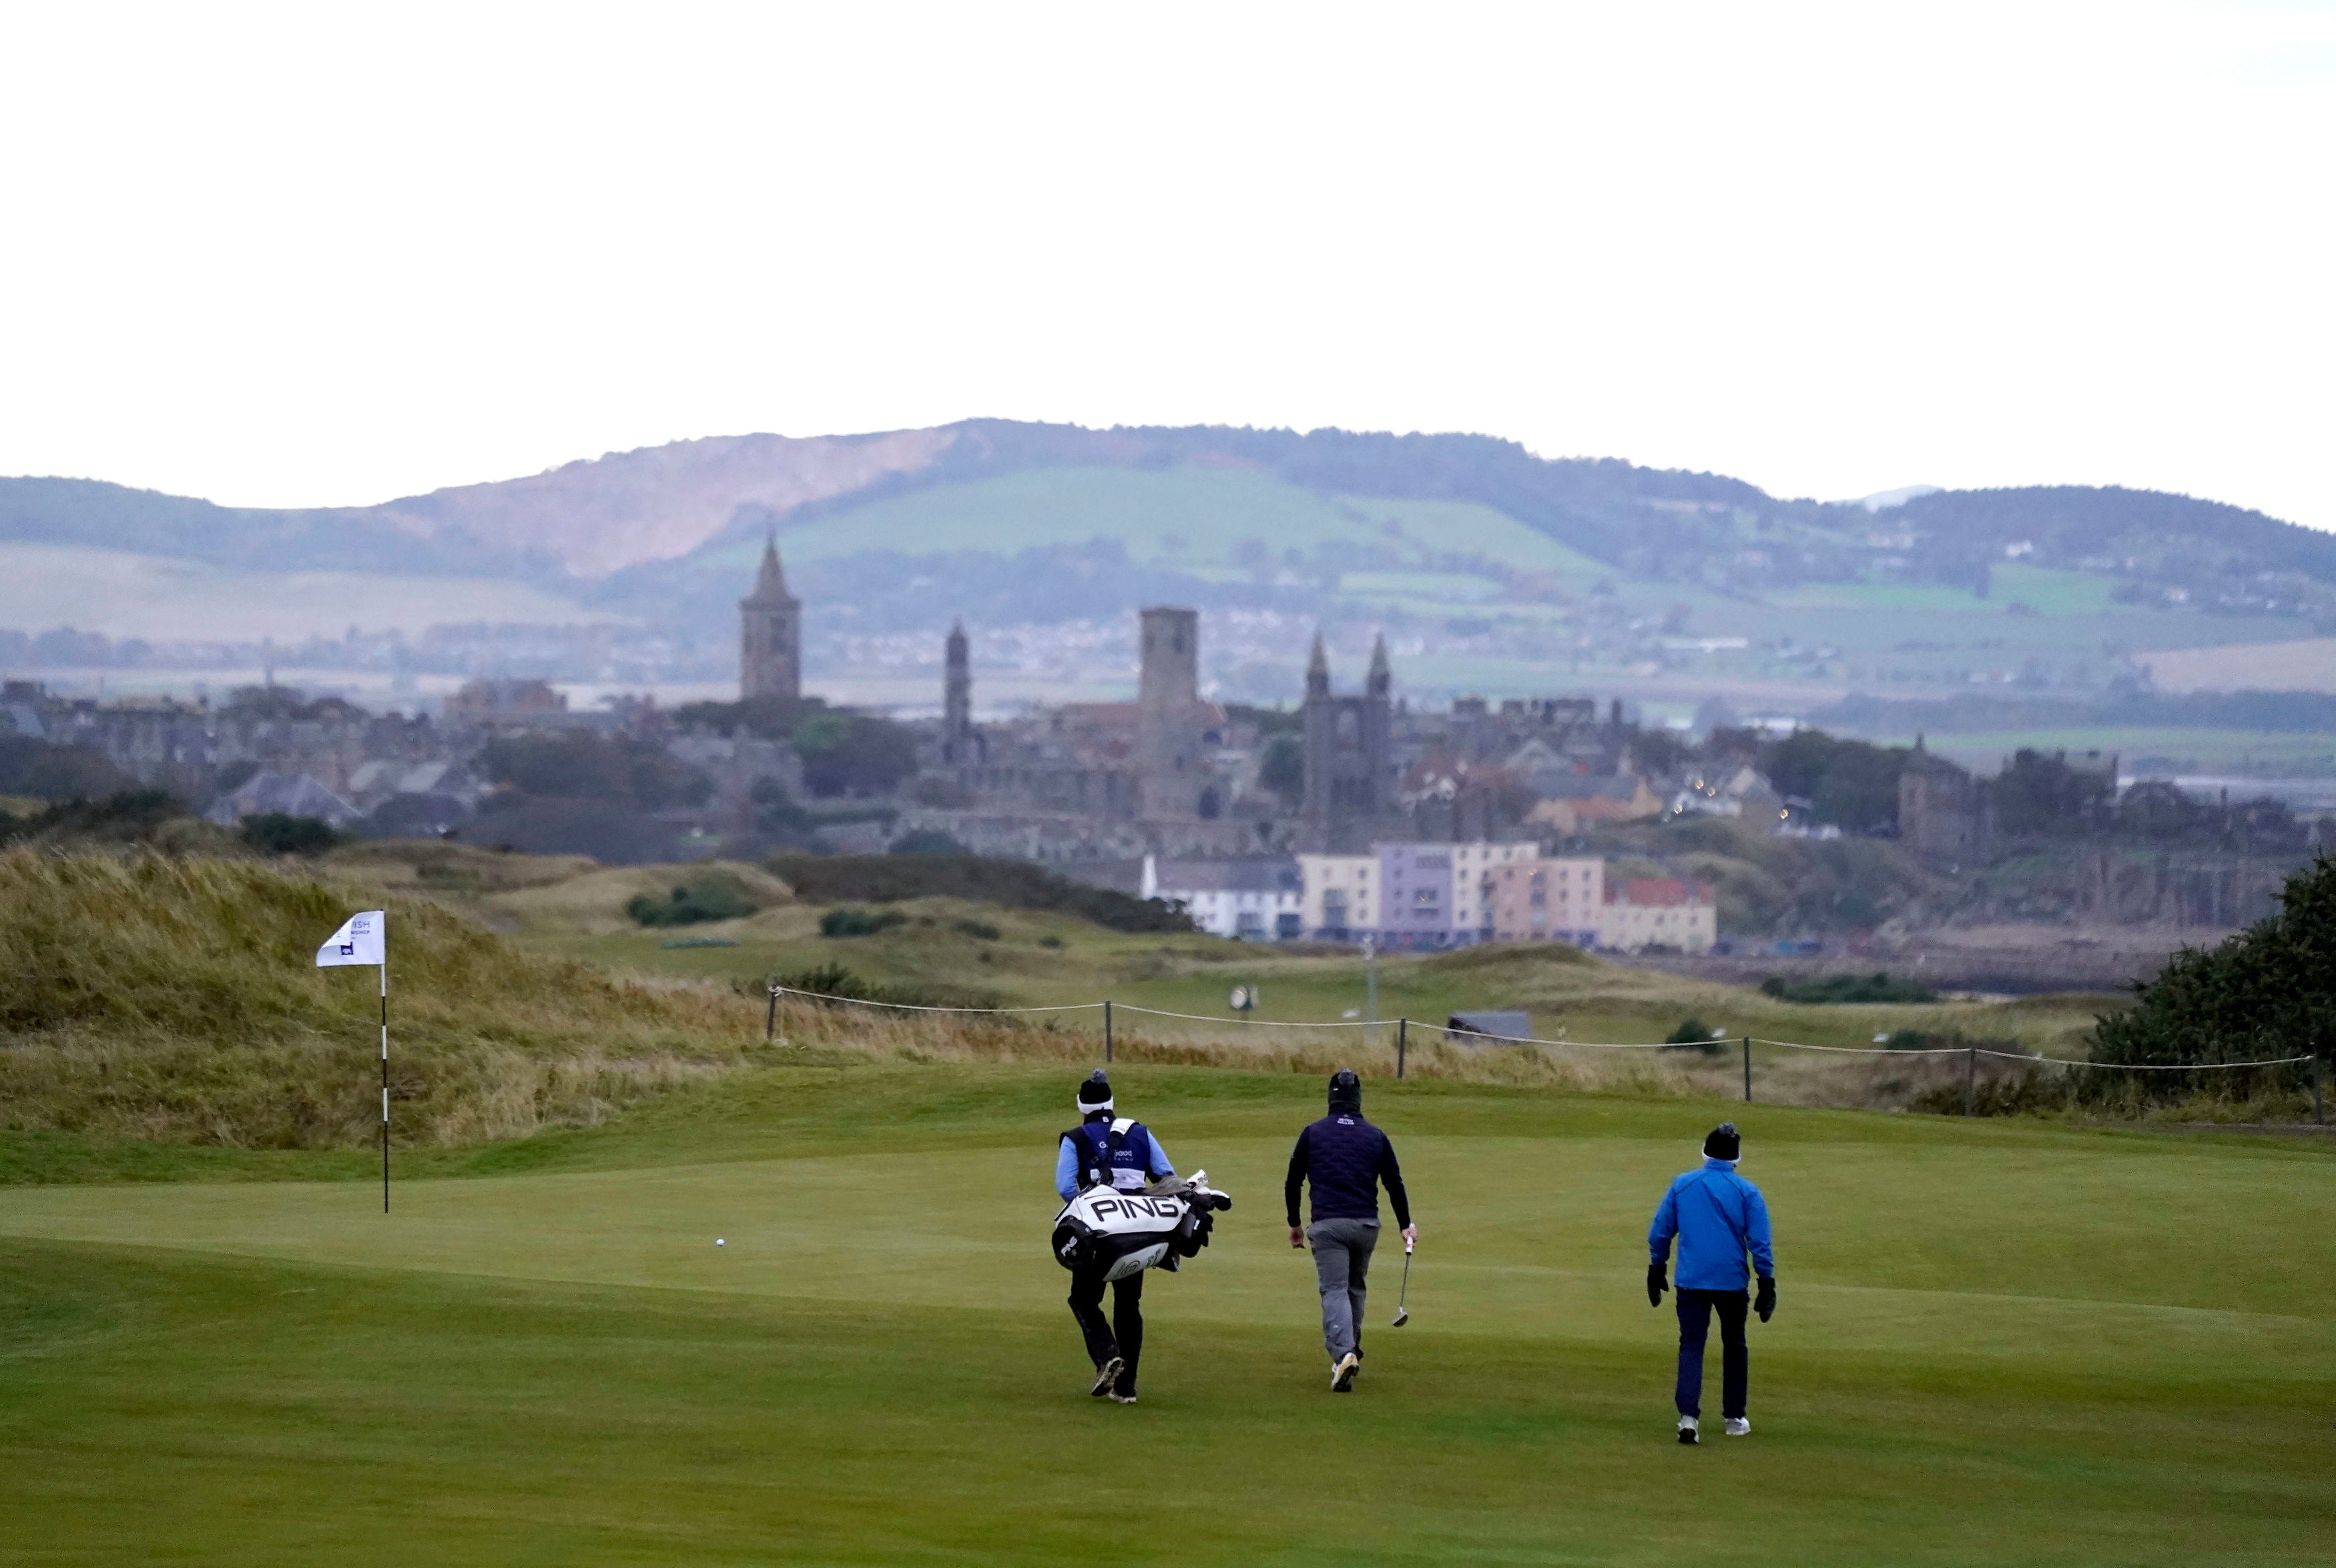 Golf will not be permitted to be played under the new restrictions